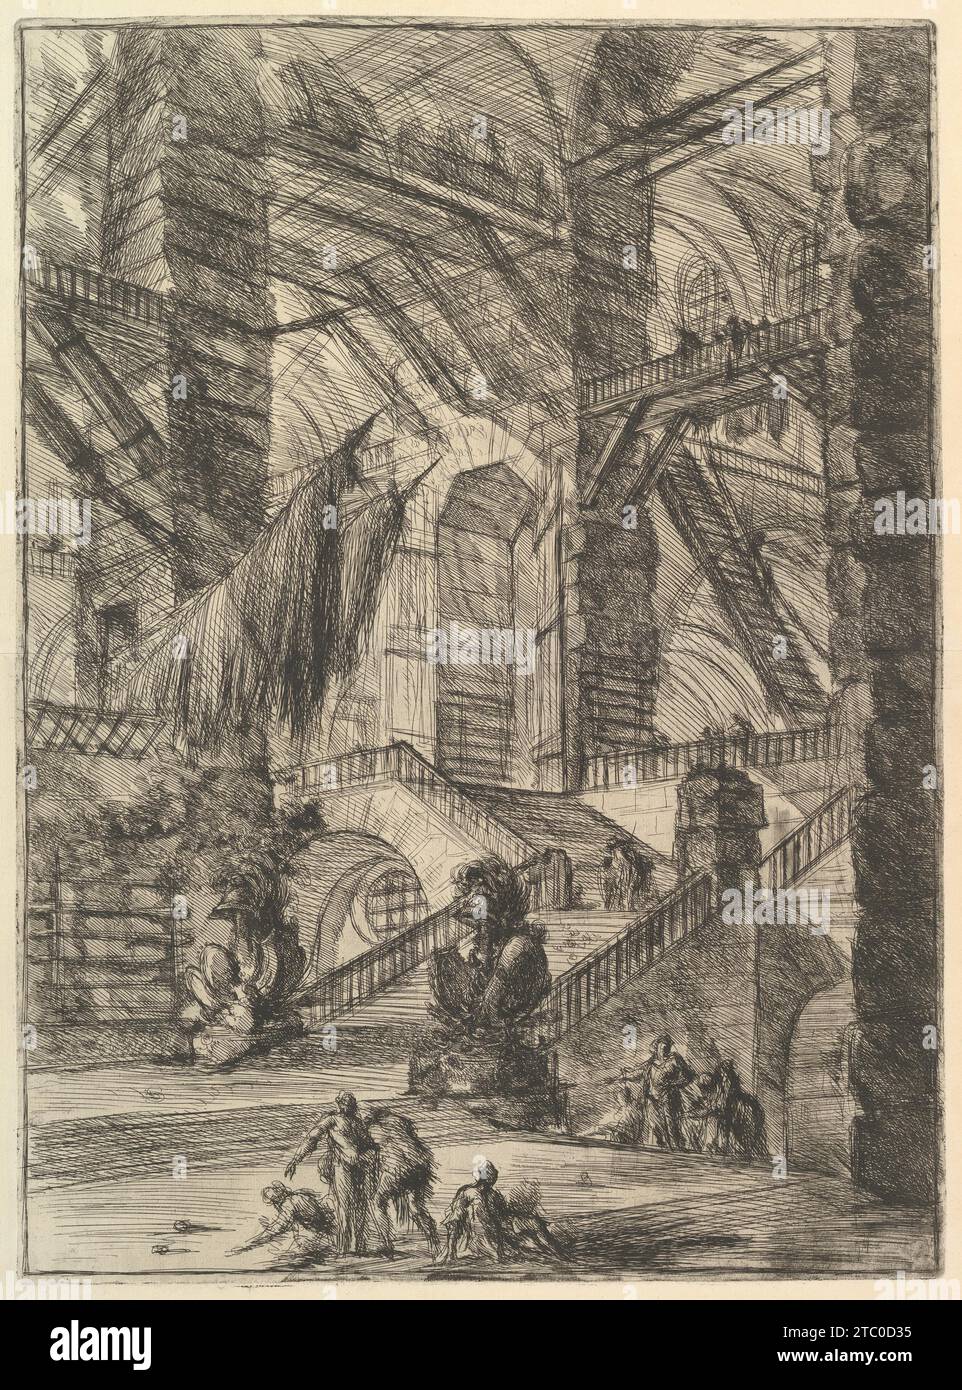 The Staircase with Trophies, from 'Carceri d'invenzione' (Imaginary Prisons) 1937 by Giovanni Battista Piranesi Stock Photo